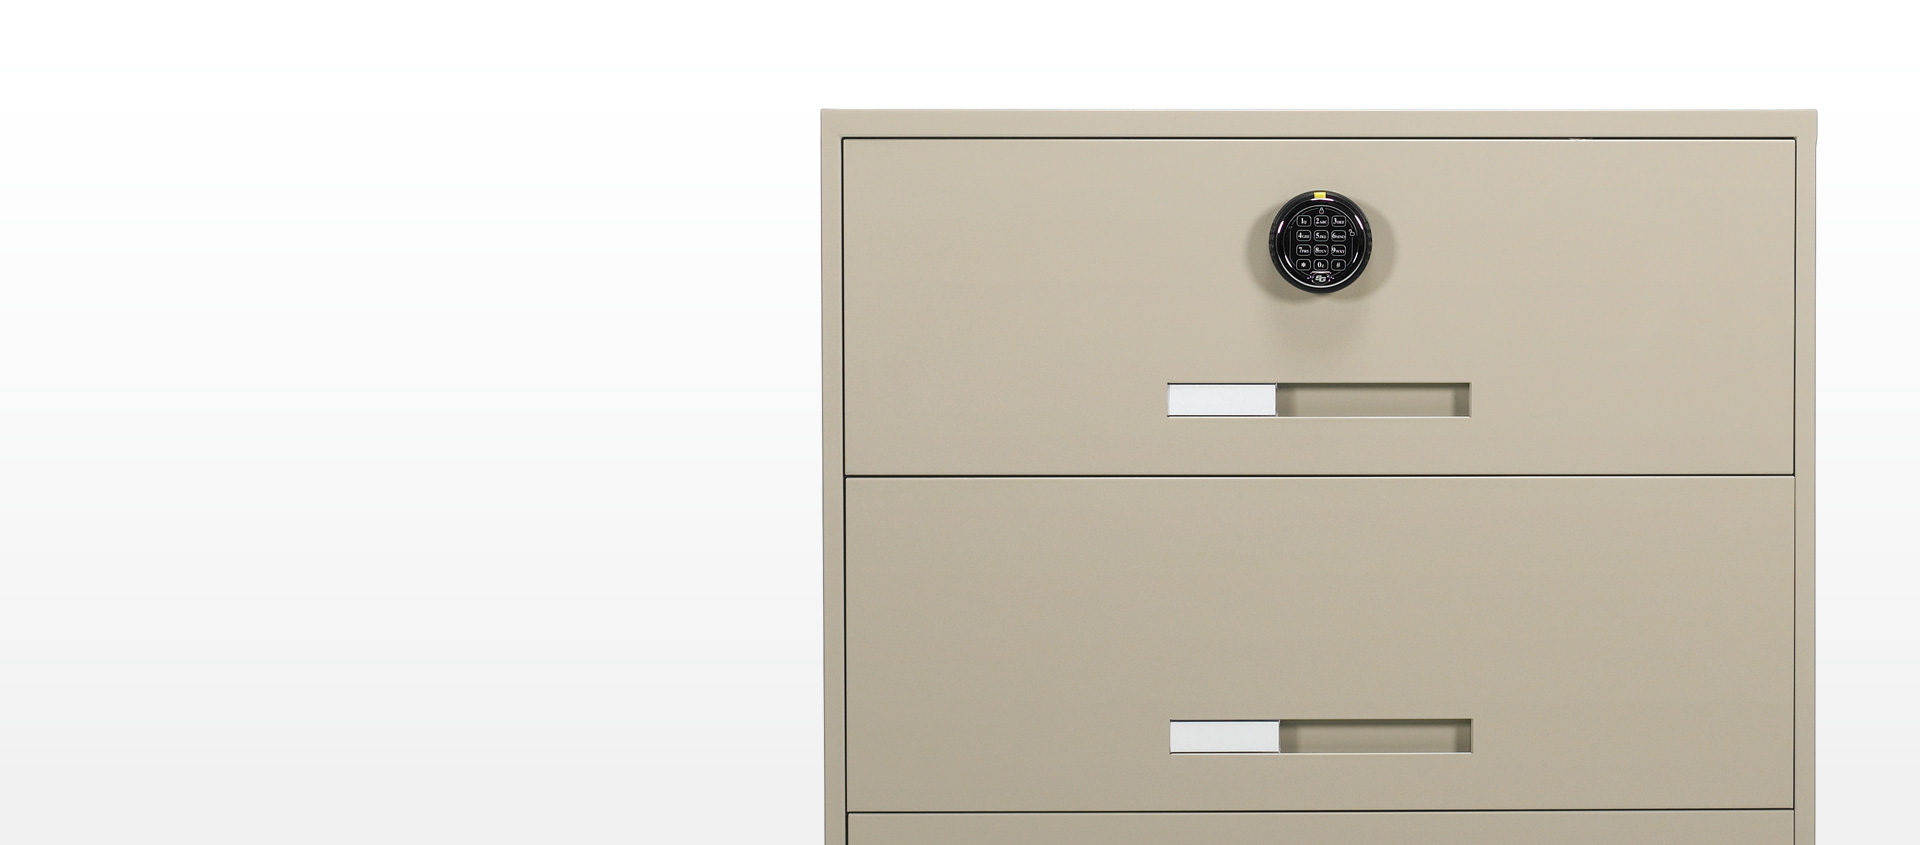 Security Cabinets Global